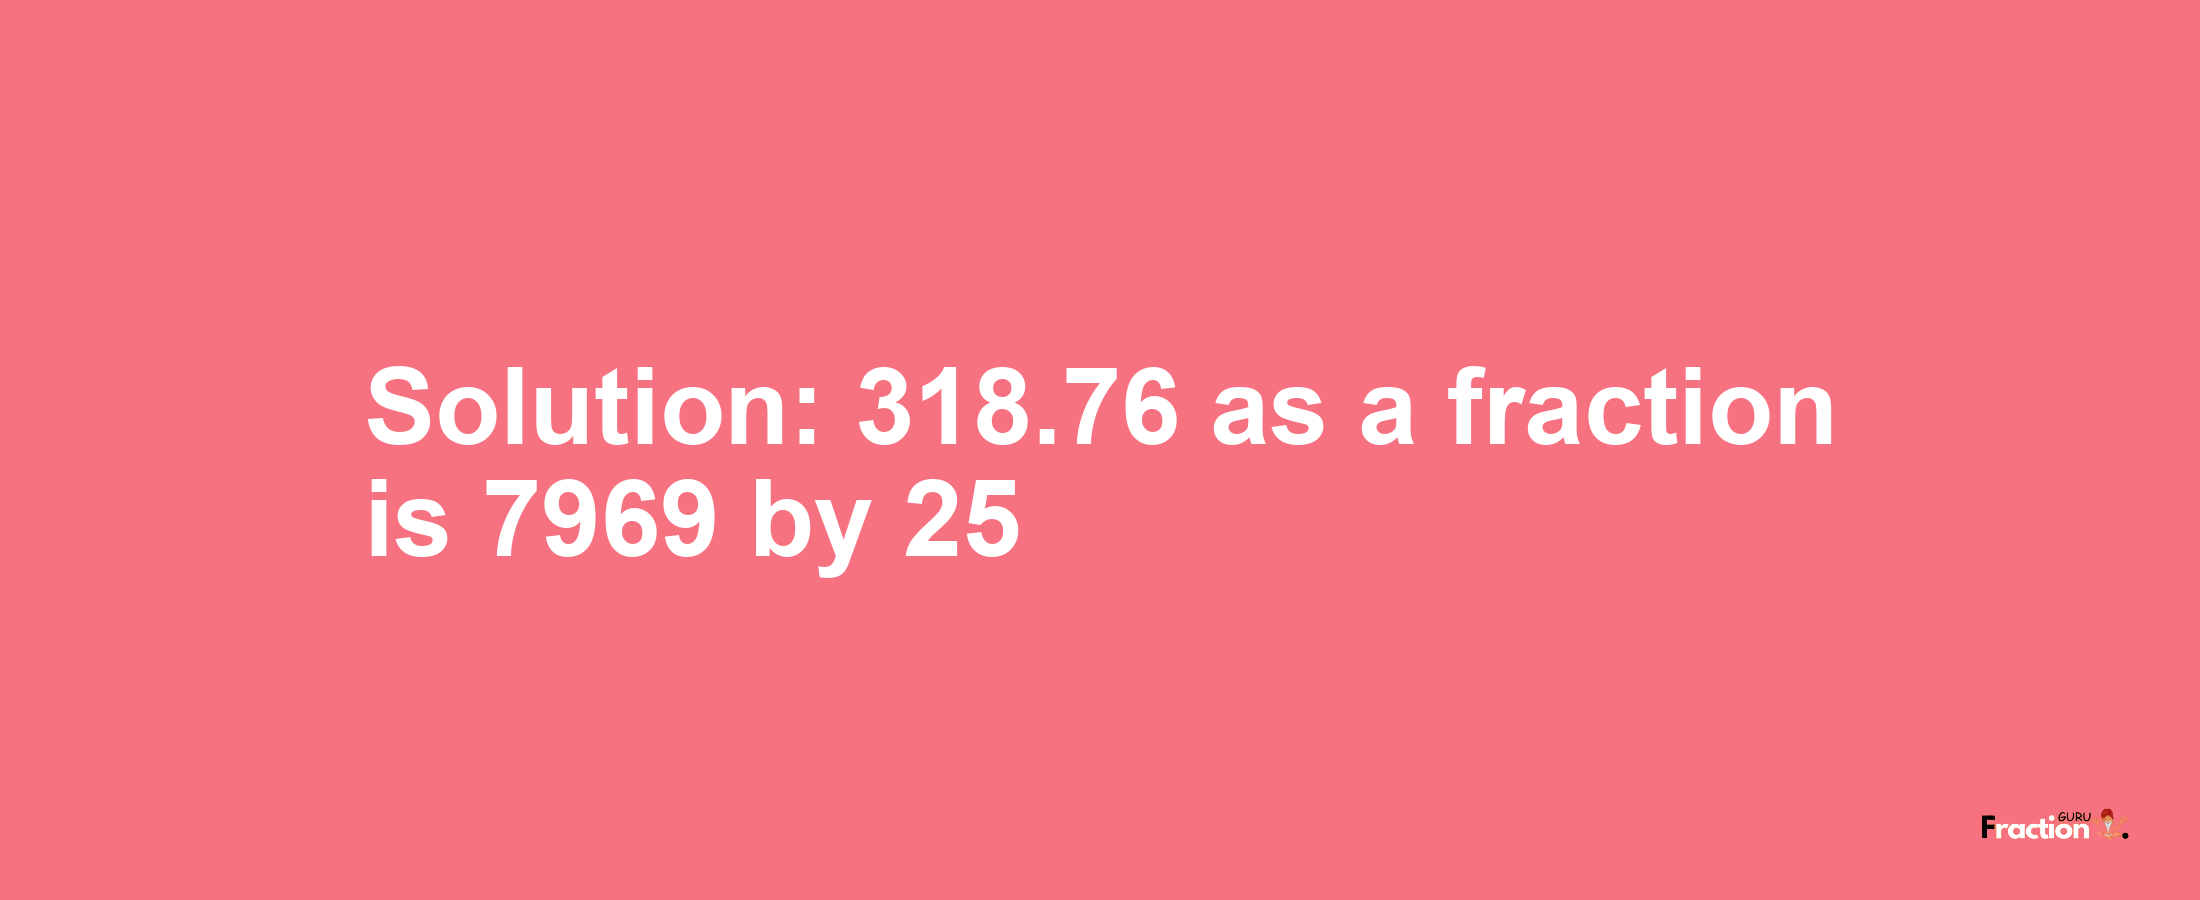 Solution:318.76 as a fraction is 7969/25